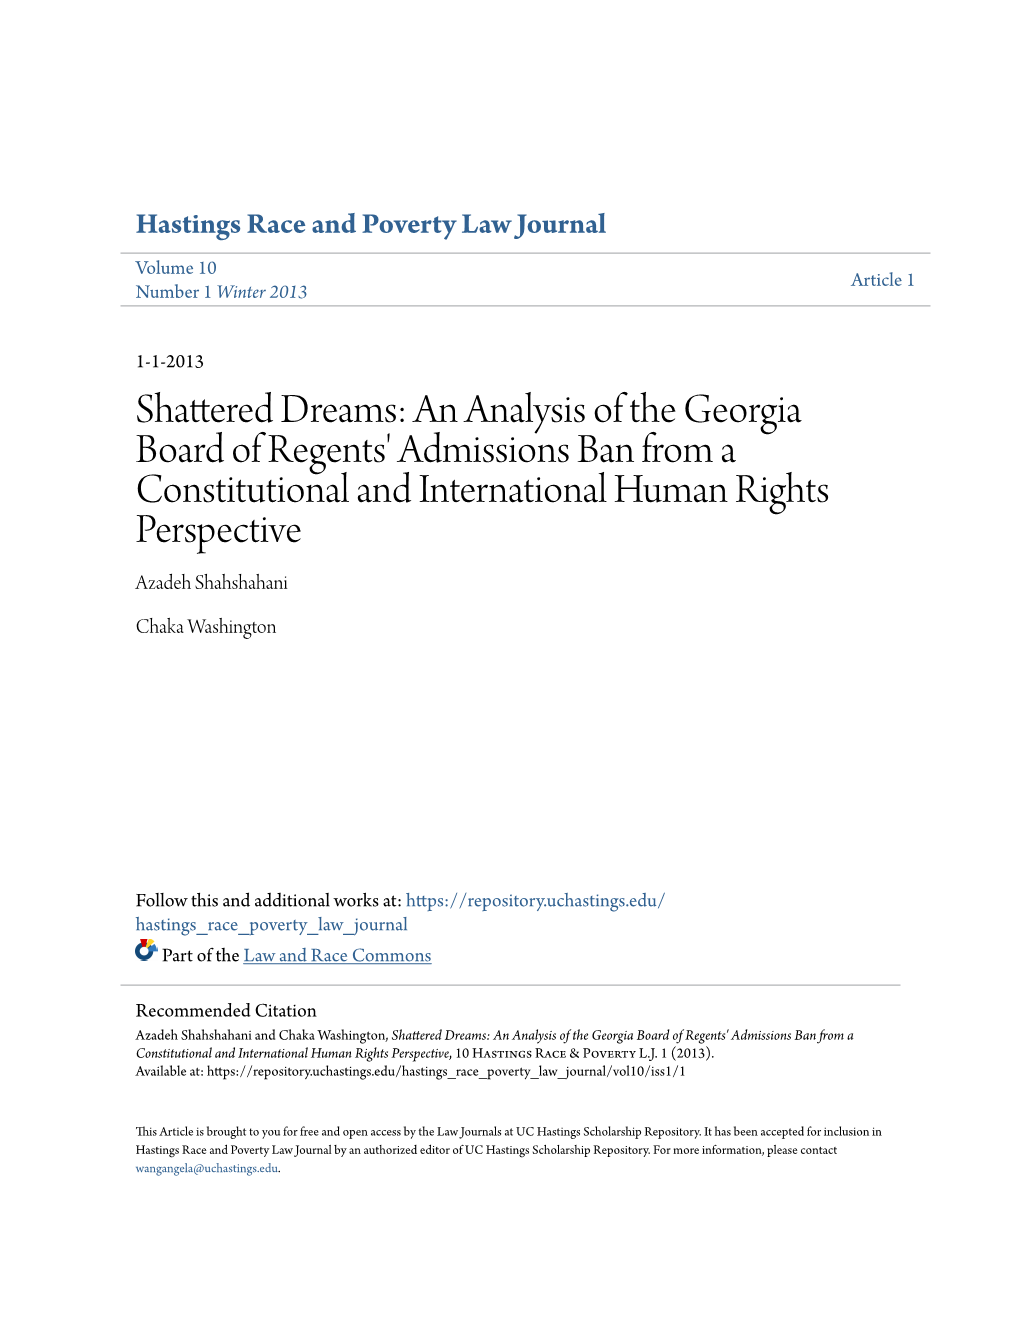 Shattered Dreams: an Analysis of the Georgia Board of Regents' Admissions Ban from a Constitutional and International Human Rights Perspective Azadeh Shahshahani